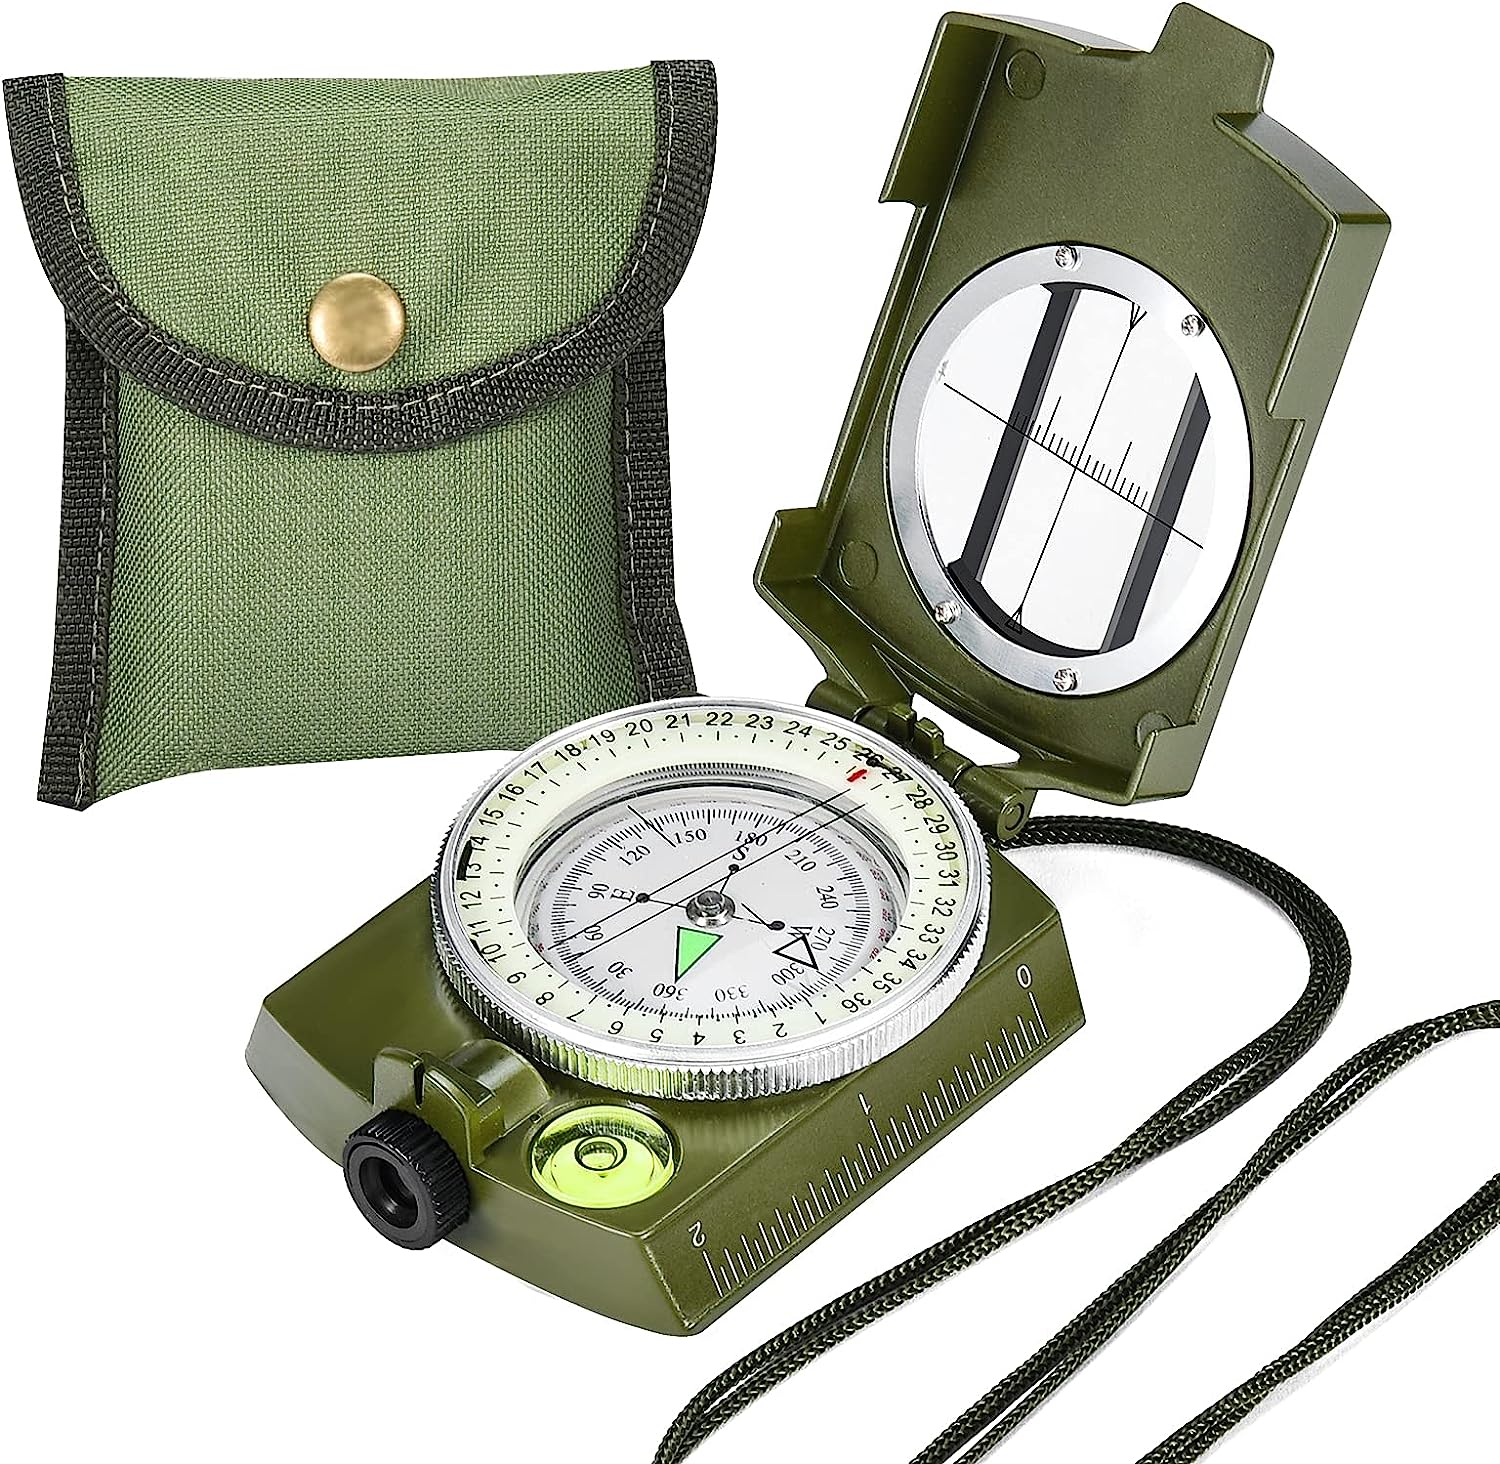 Military Lensatic Sighting Compass Survival with [...]